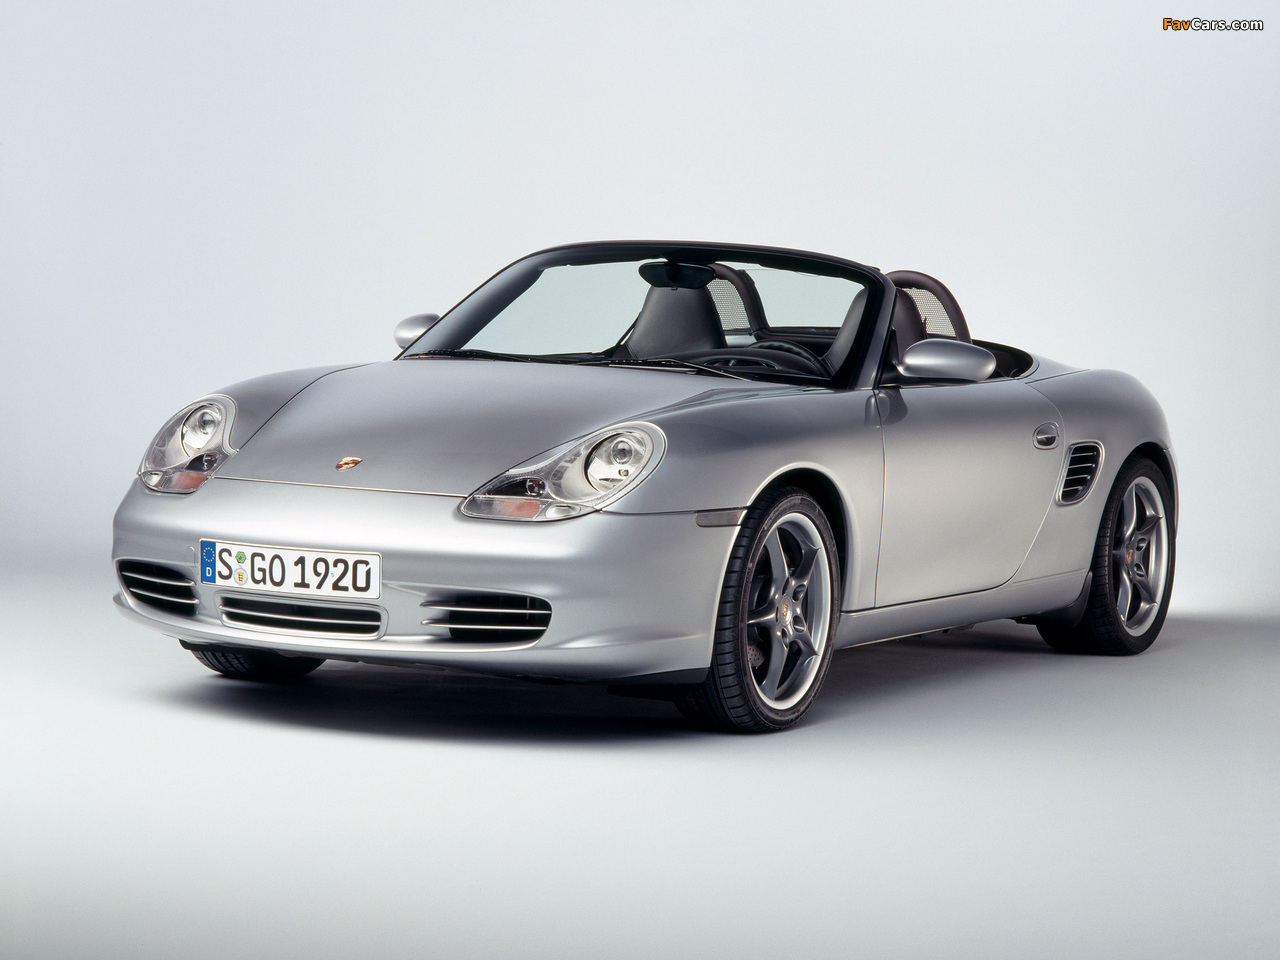 Porsche Boxster S 50 years 550 Spyder (986) 2004 pictures (1280 x 960)